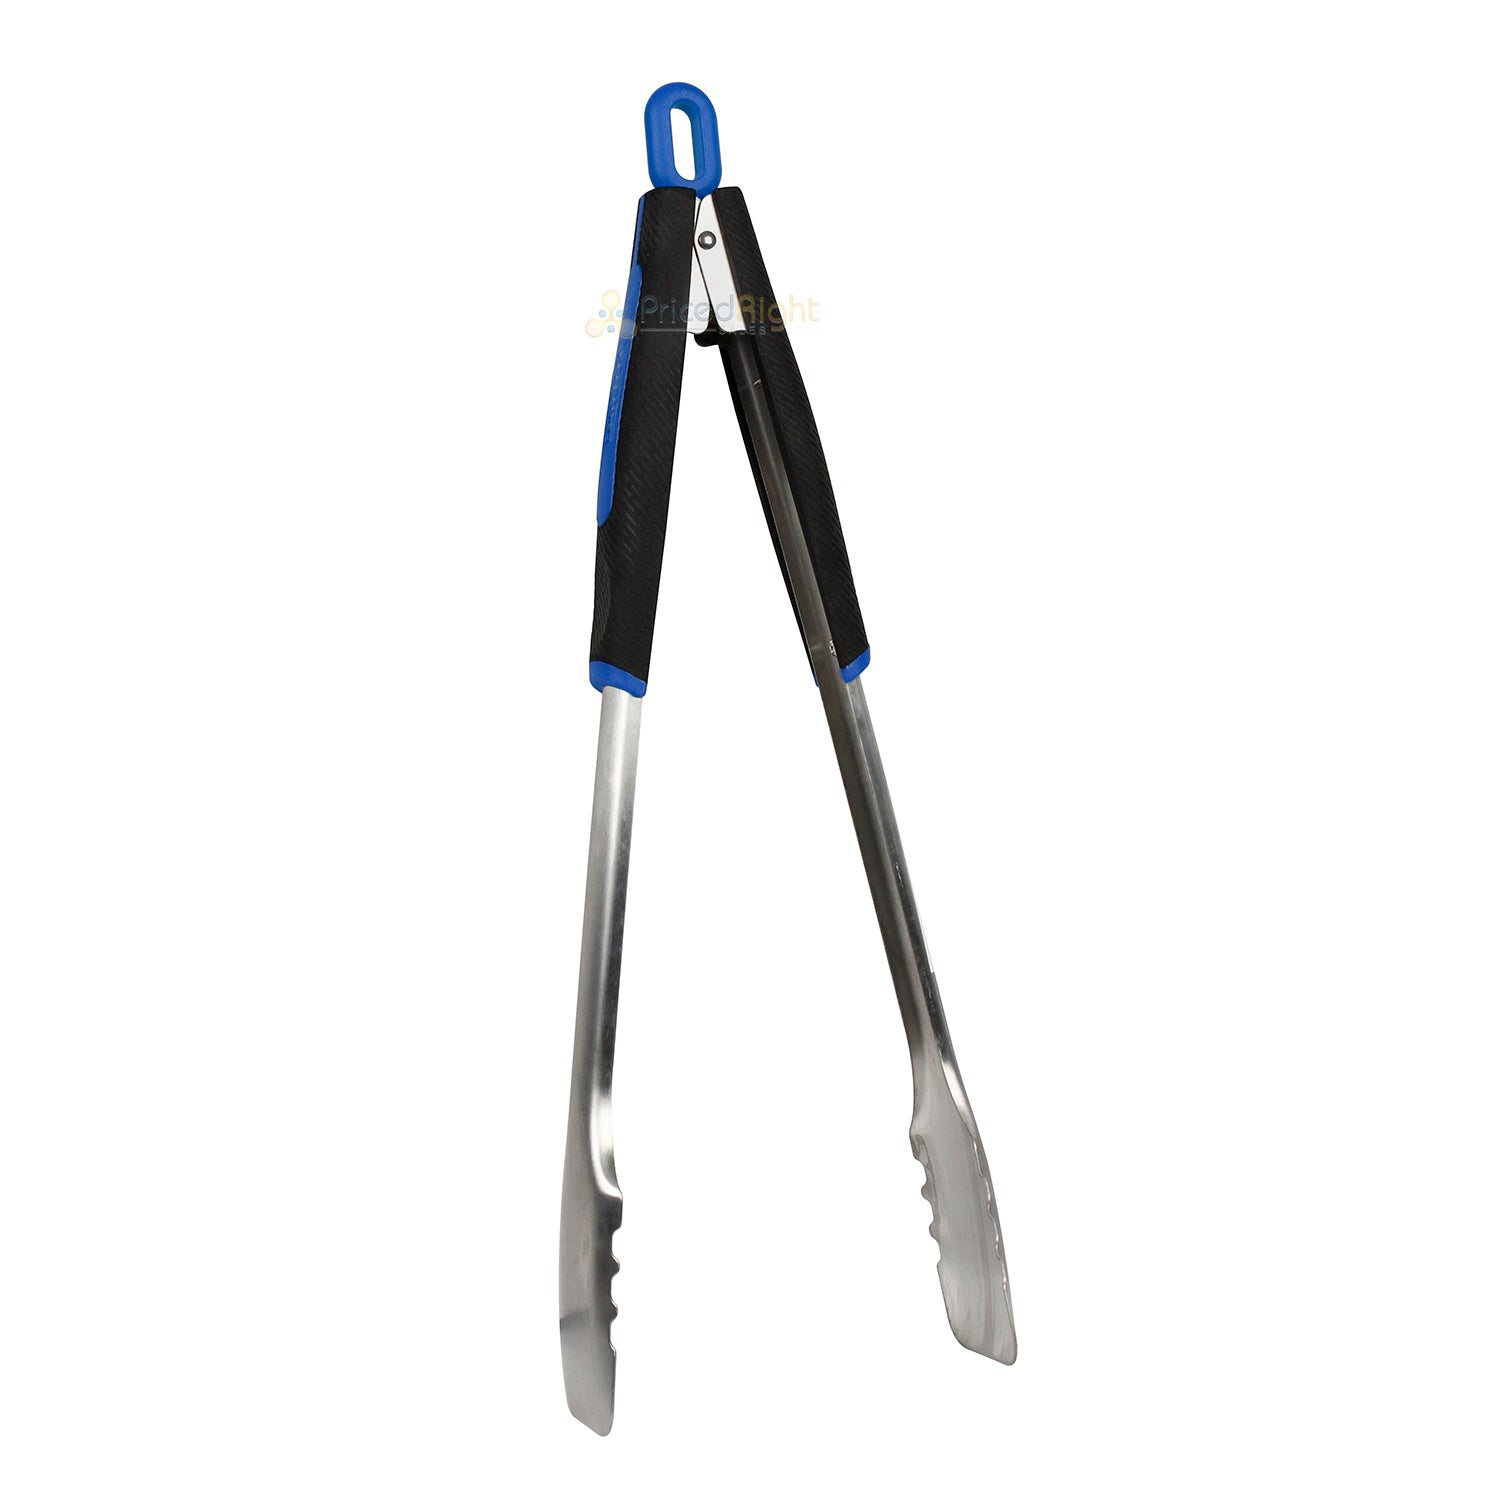 Razor Oversized Locking Tongs Stainless Steel With Non-Slip Rubber Grip 17 In